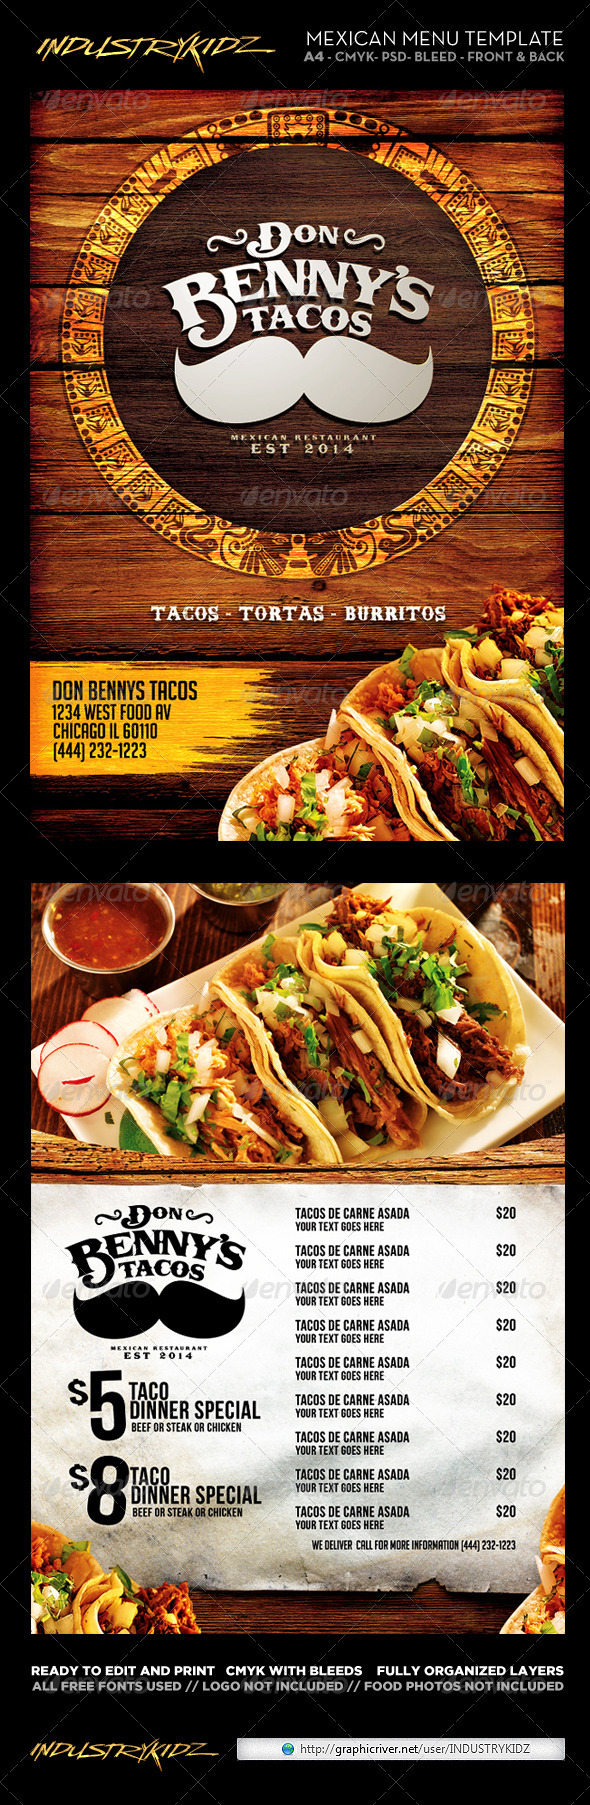 Mexican Menu Template by INDUSTRYKIDZ | GraphicRiver